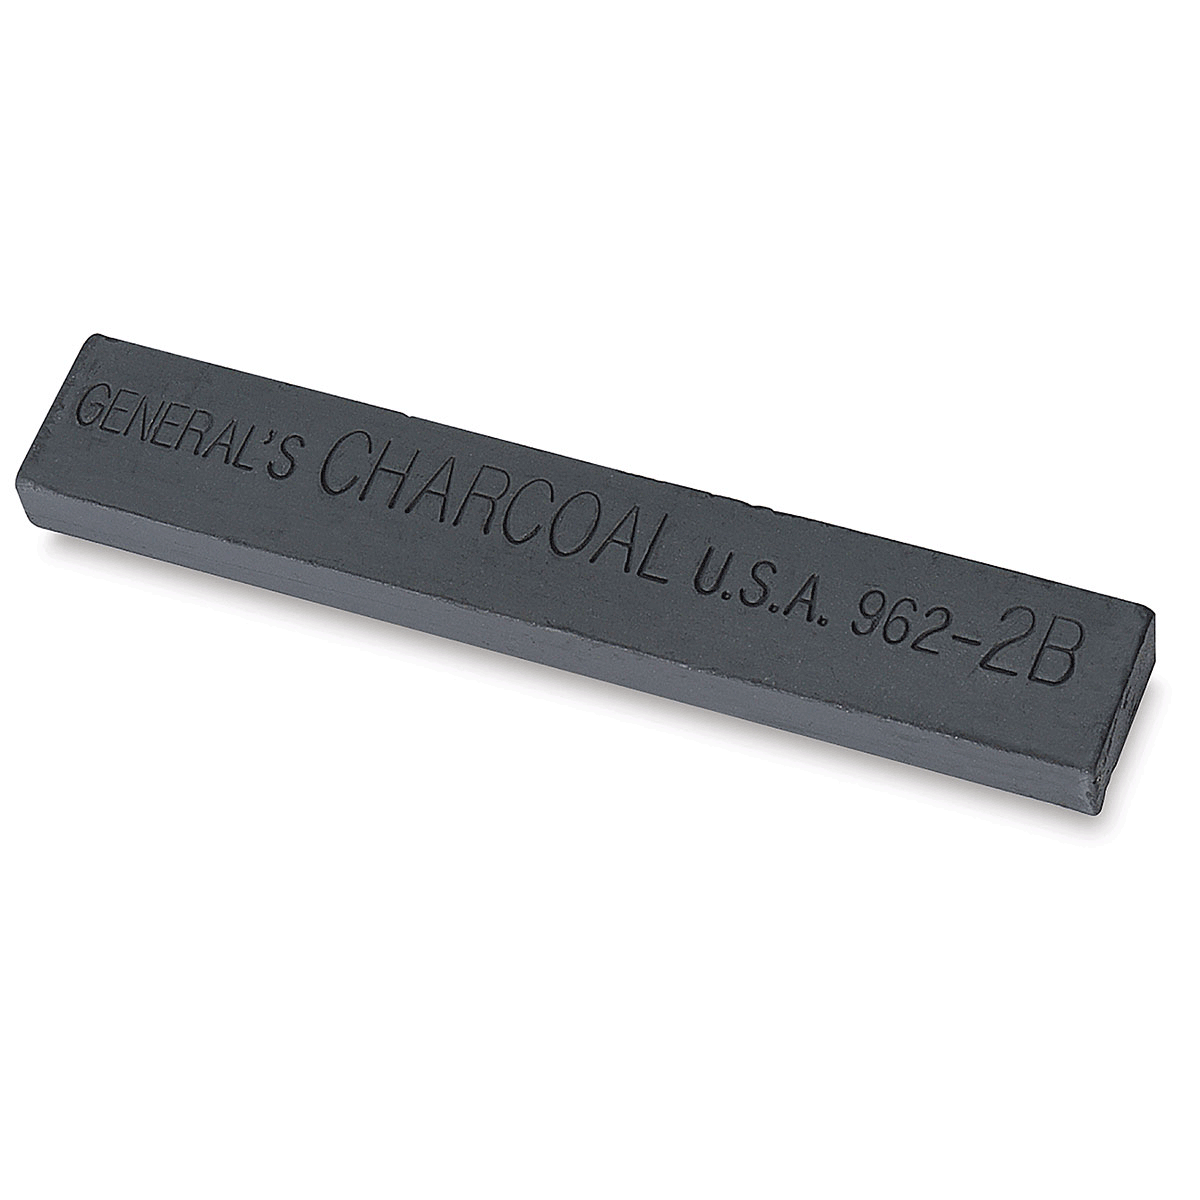 General's Compressed Charcoal Rectangle Stick - 2B